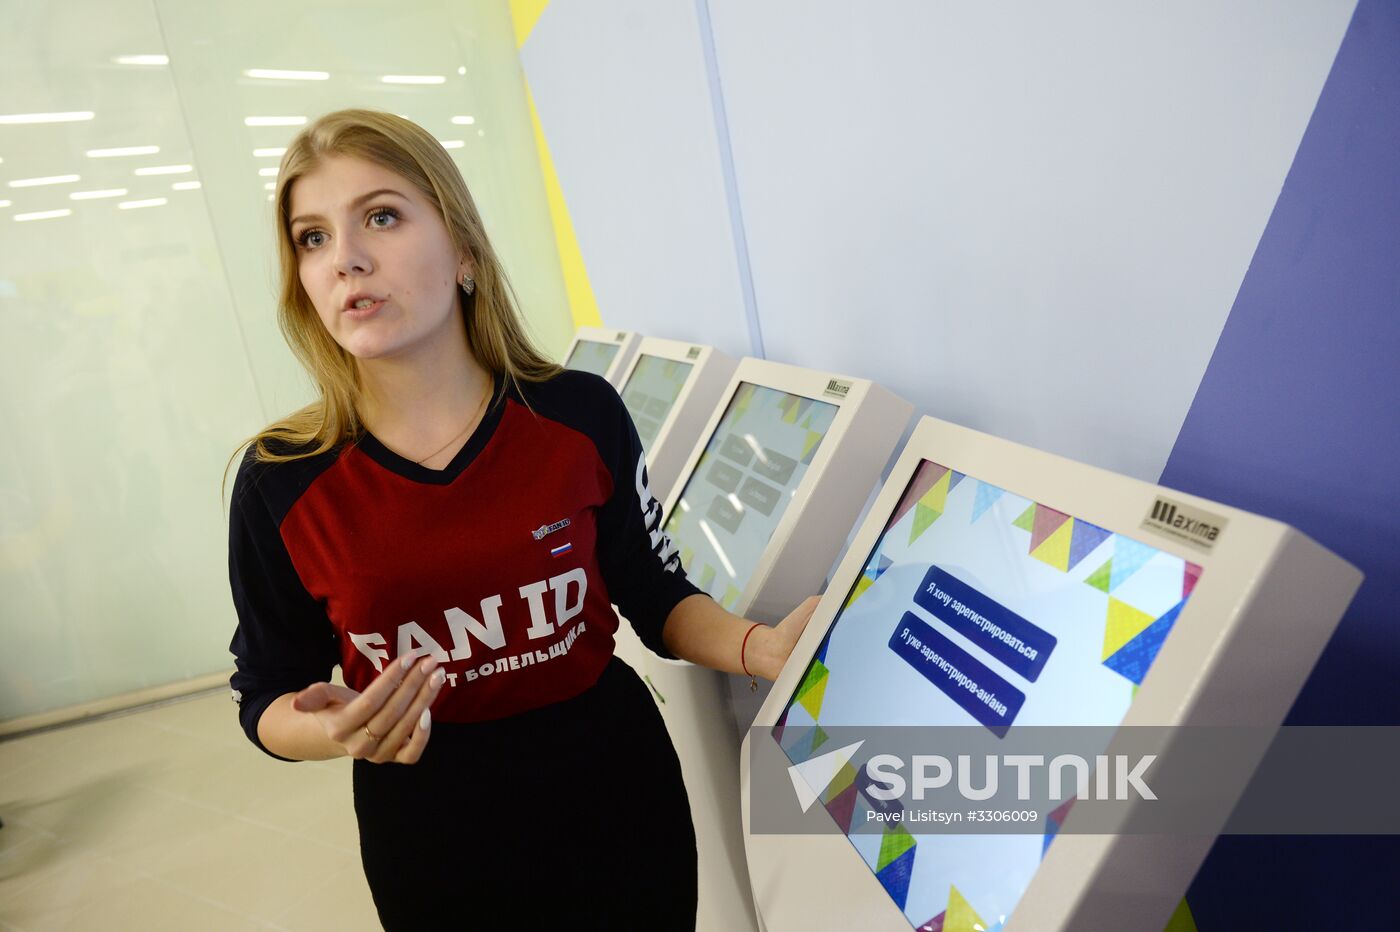 2018 FIFA World Cup FAN ID distribution center opens in Yekaterinburg